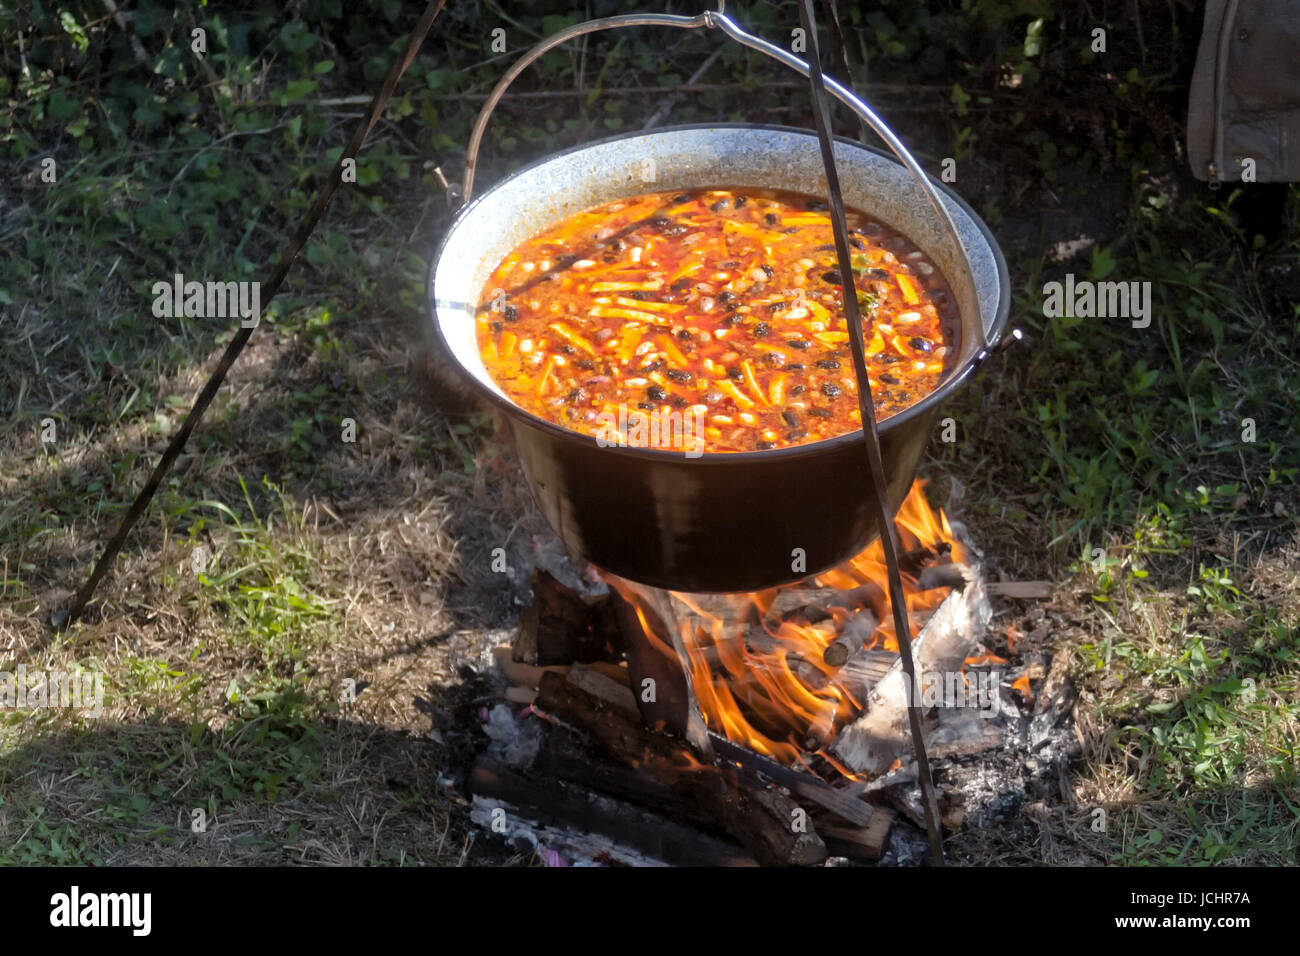 Cooking bean goulash in a caldron on open flame Stock Photo